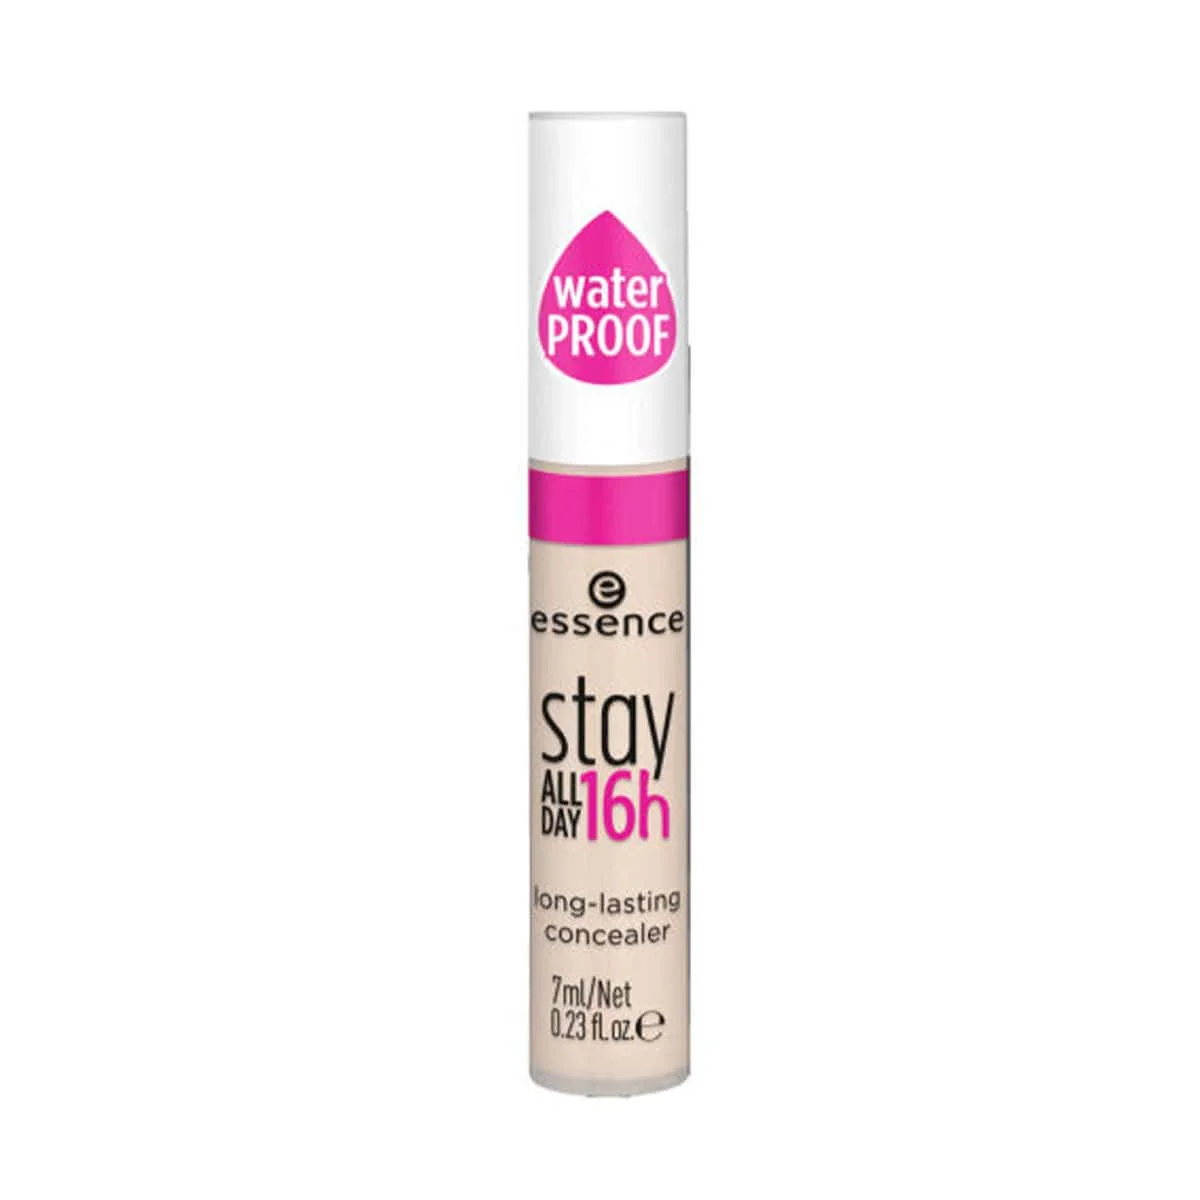 Style Turk, ESSENCE Stay All Day 16h Long-Lasting Concealer, Water Proof  Concealer, 20 Soft Beige